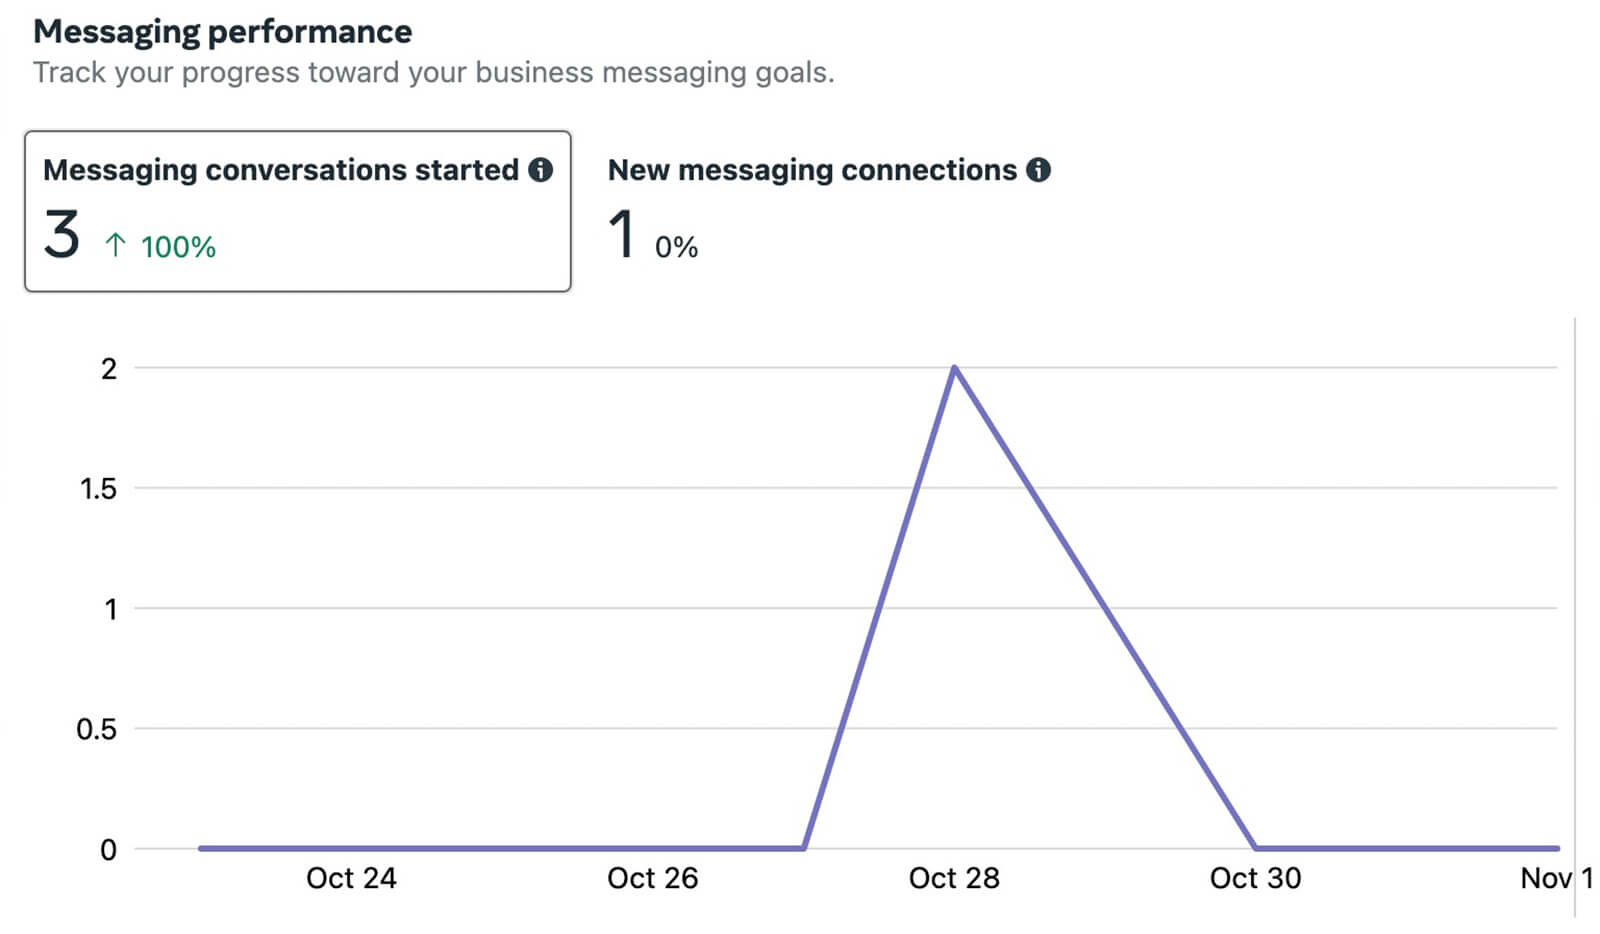 how-to-see-facebook-messaging-insights-facebook-only-track-number-of-conversions-and-connections-example-26